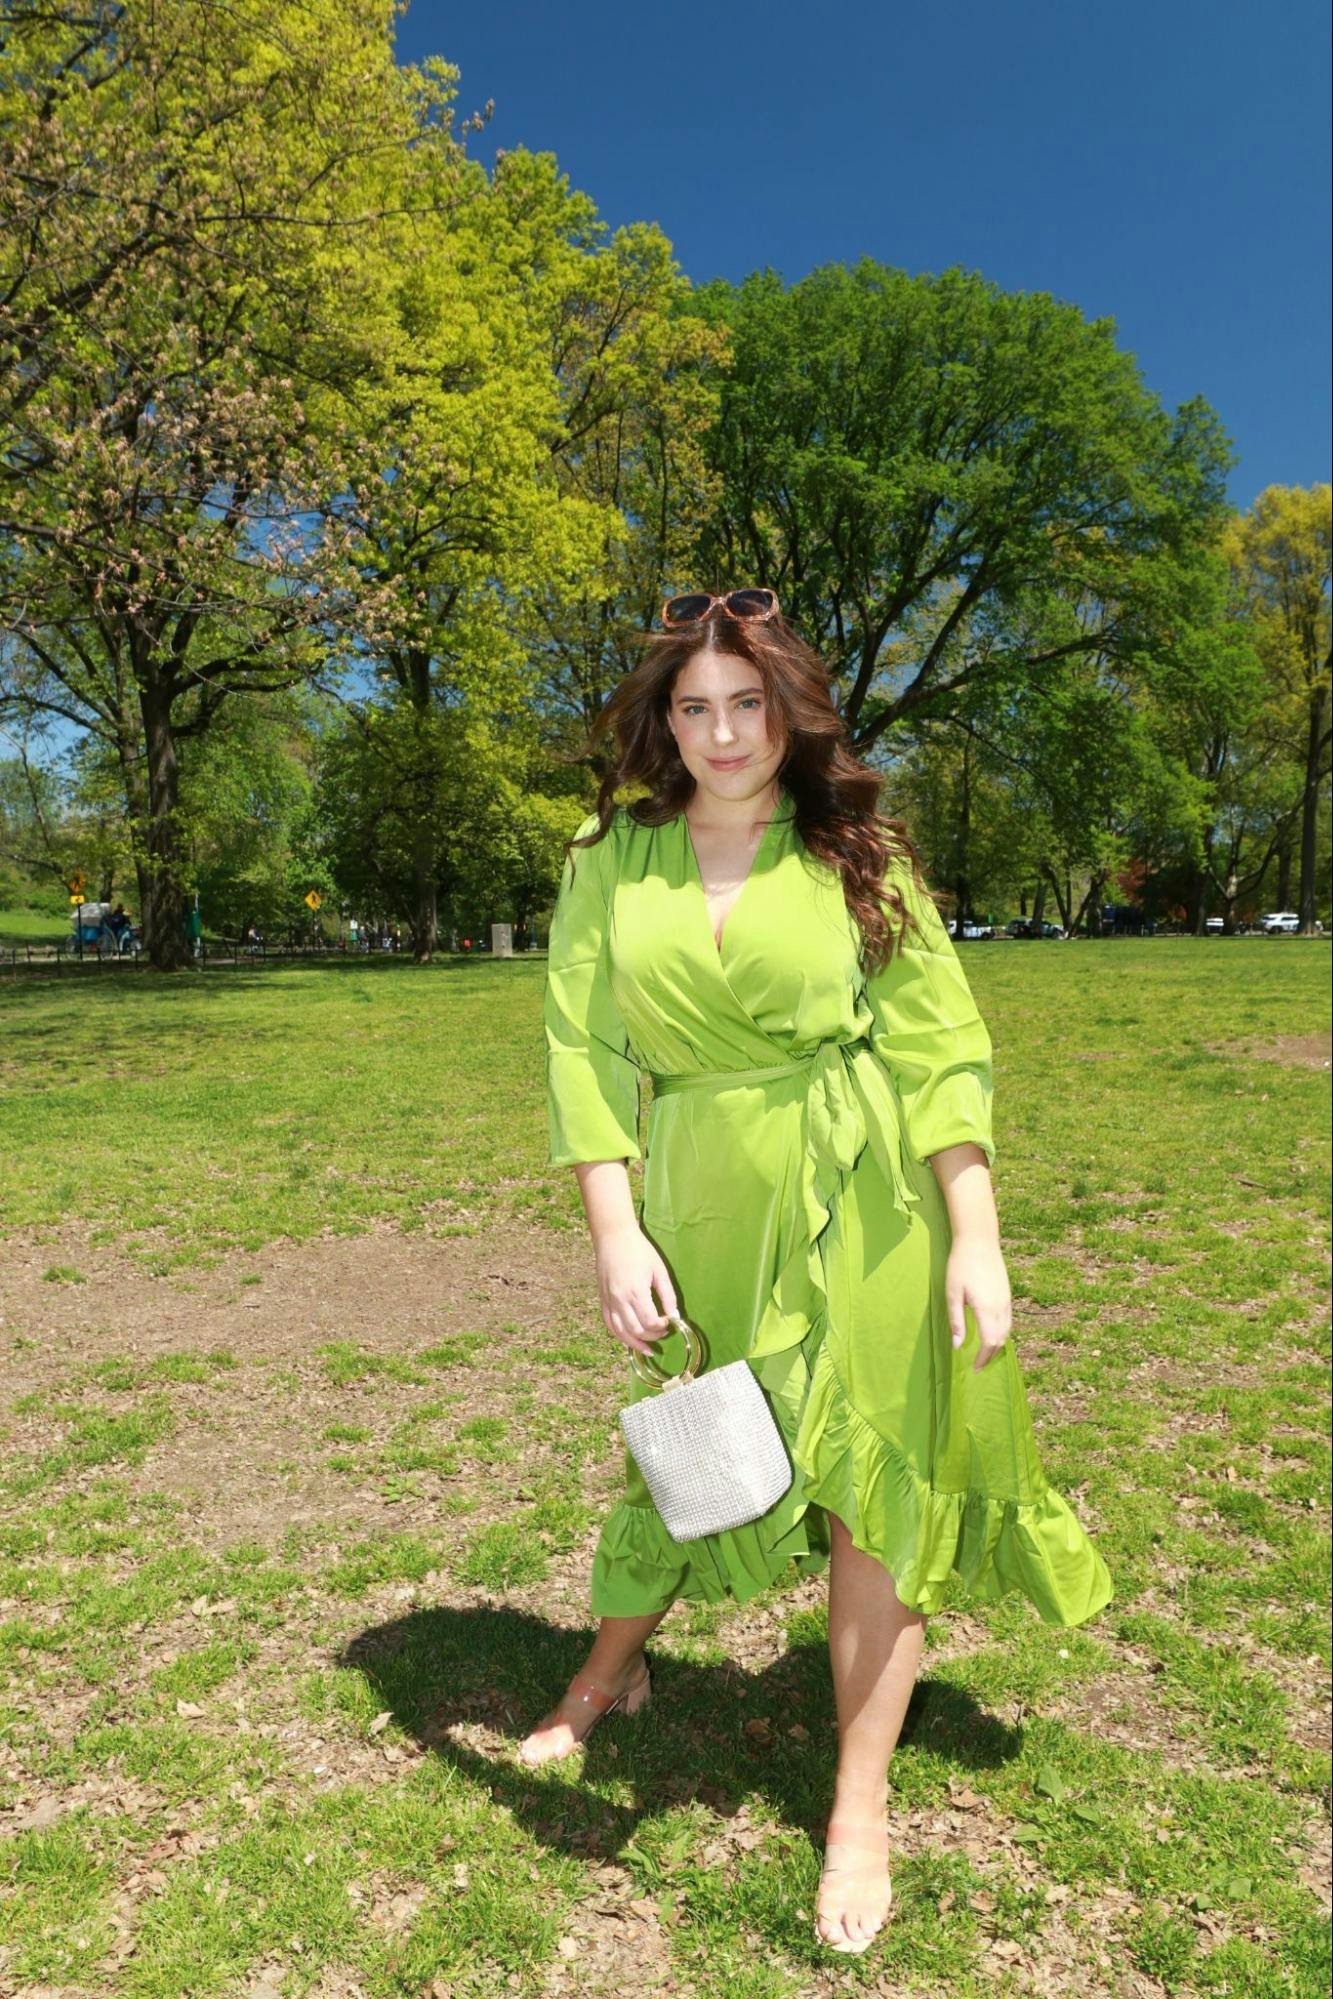 A young woman poses outside on park grass surrounded by green trees. She wears a dress as bright as the plants surrounding her